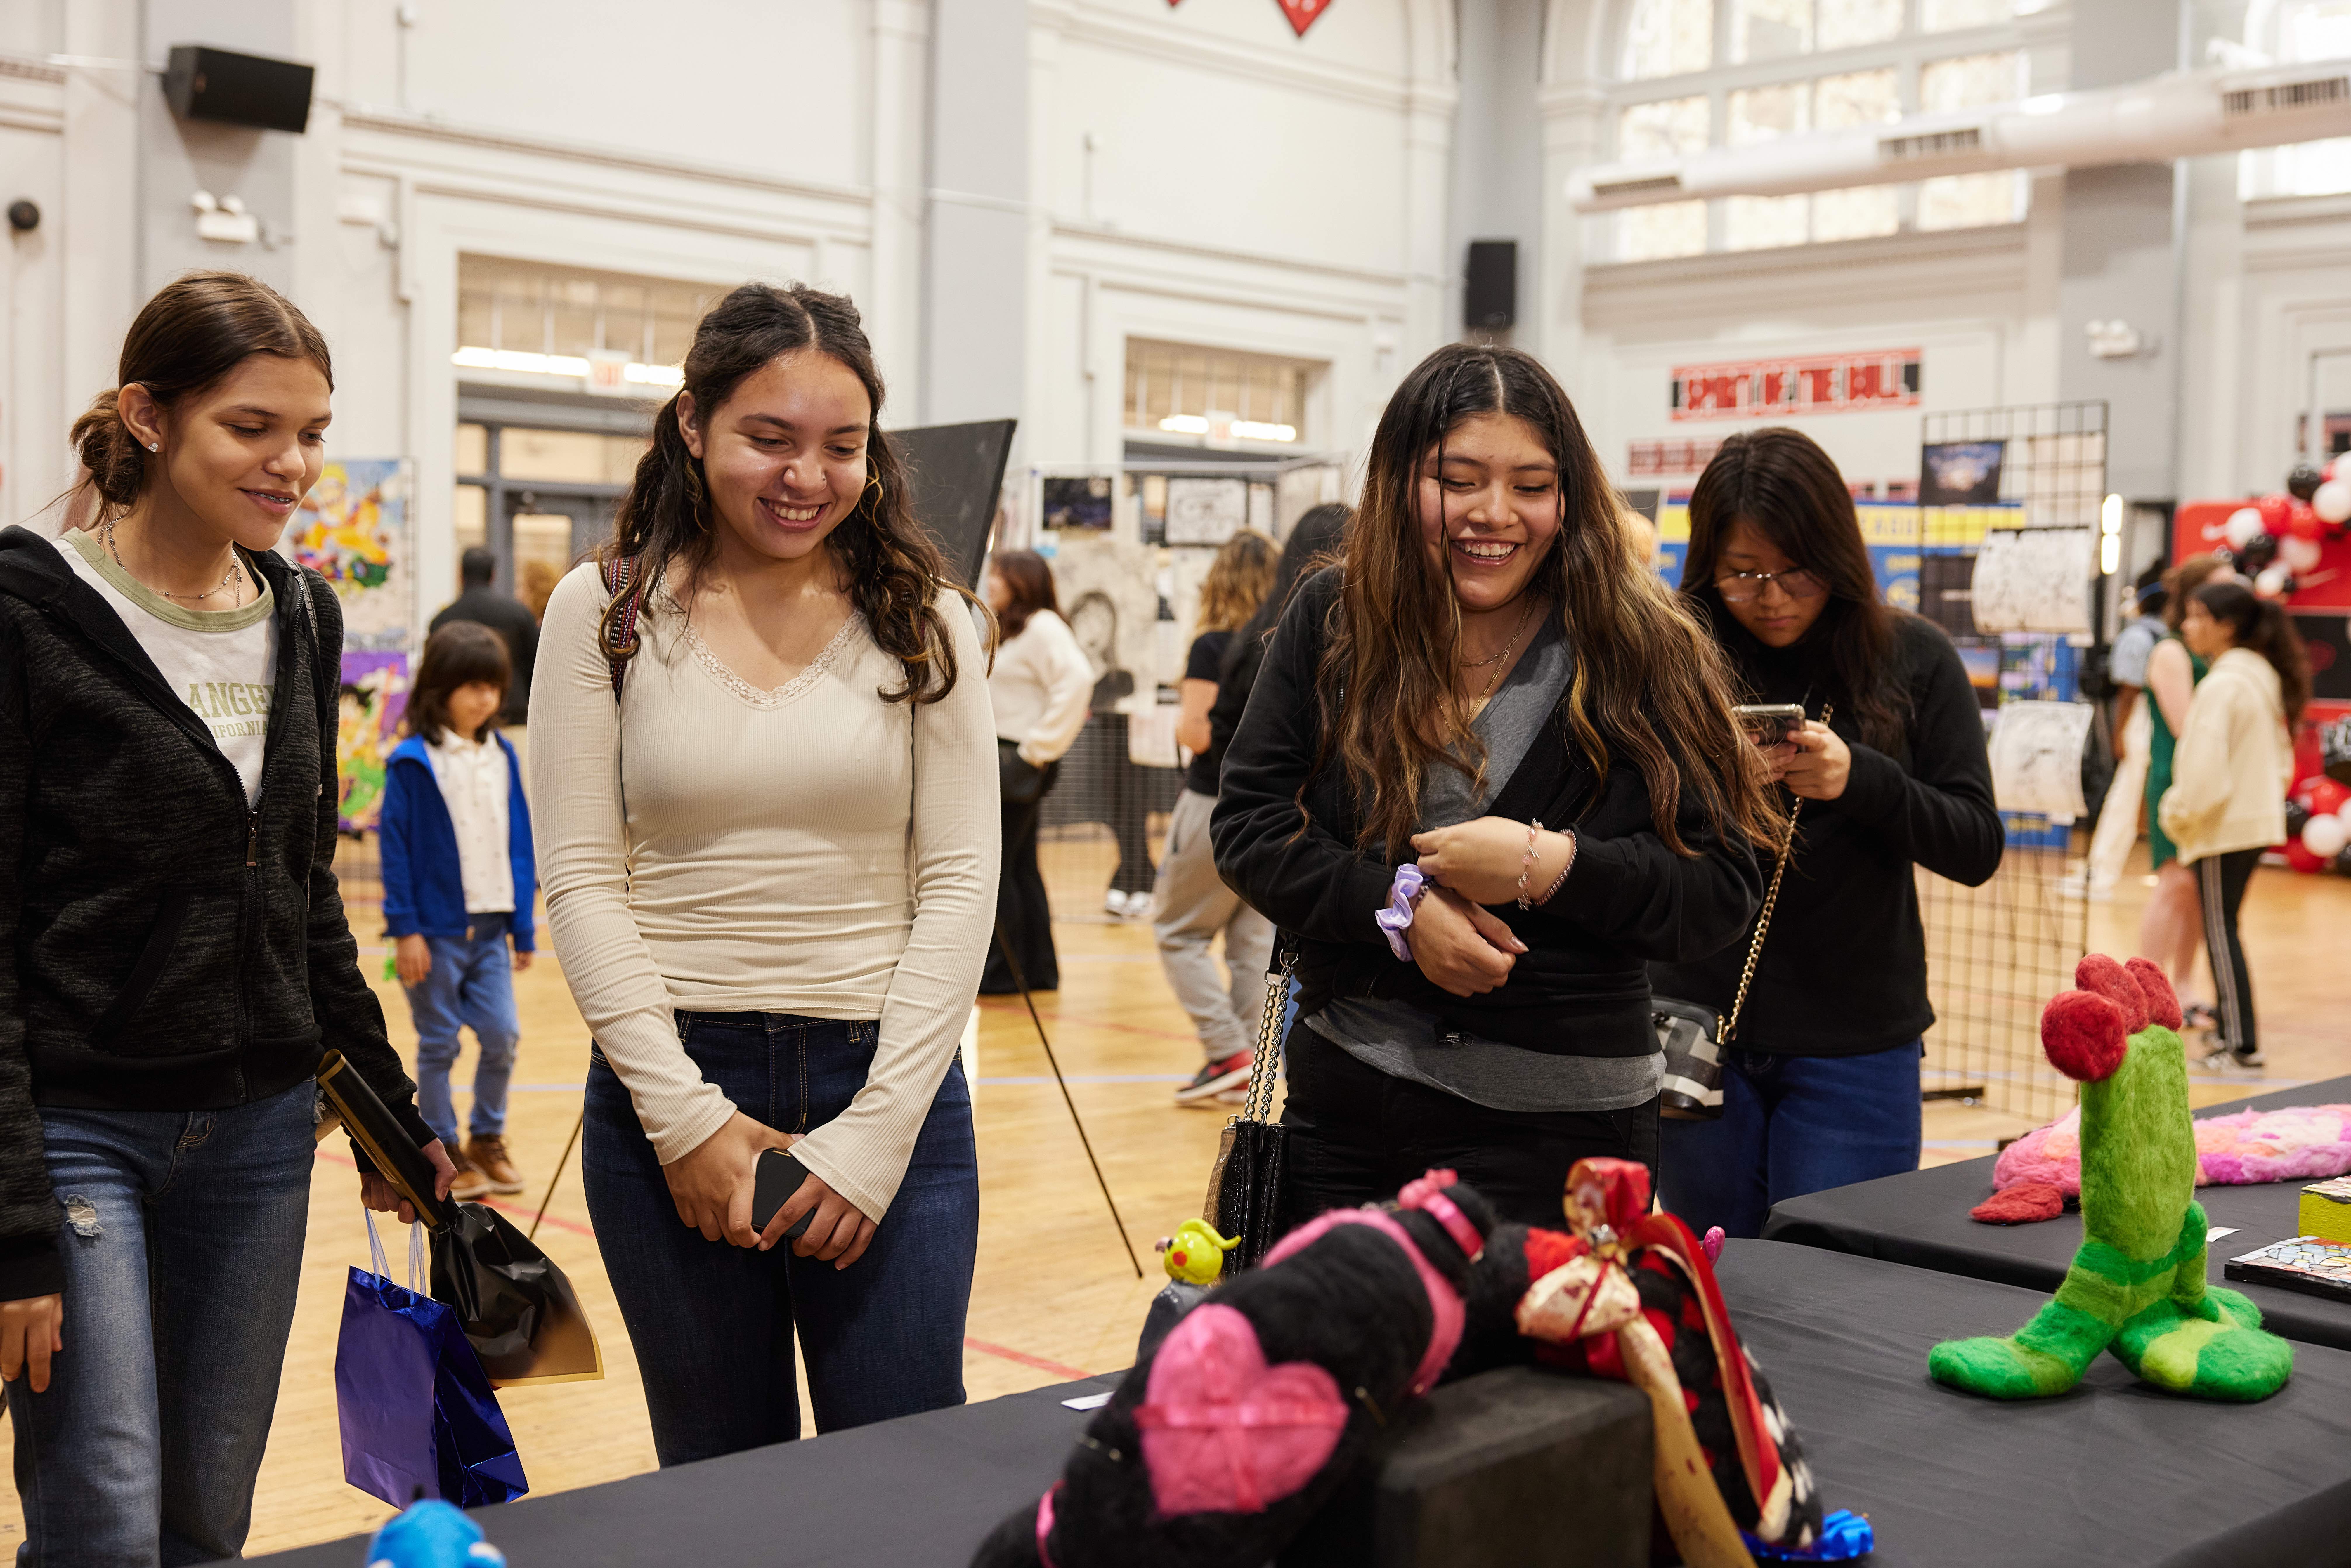 This image shows three Noble Schools students smiling at some art pieces on the table at the Visual Arts Festival. Behind them, you can see other people viewing all the student artwork displayed in the Chicago Bulls College Prep gym.